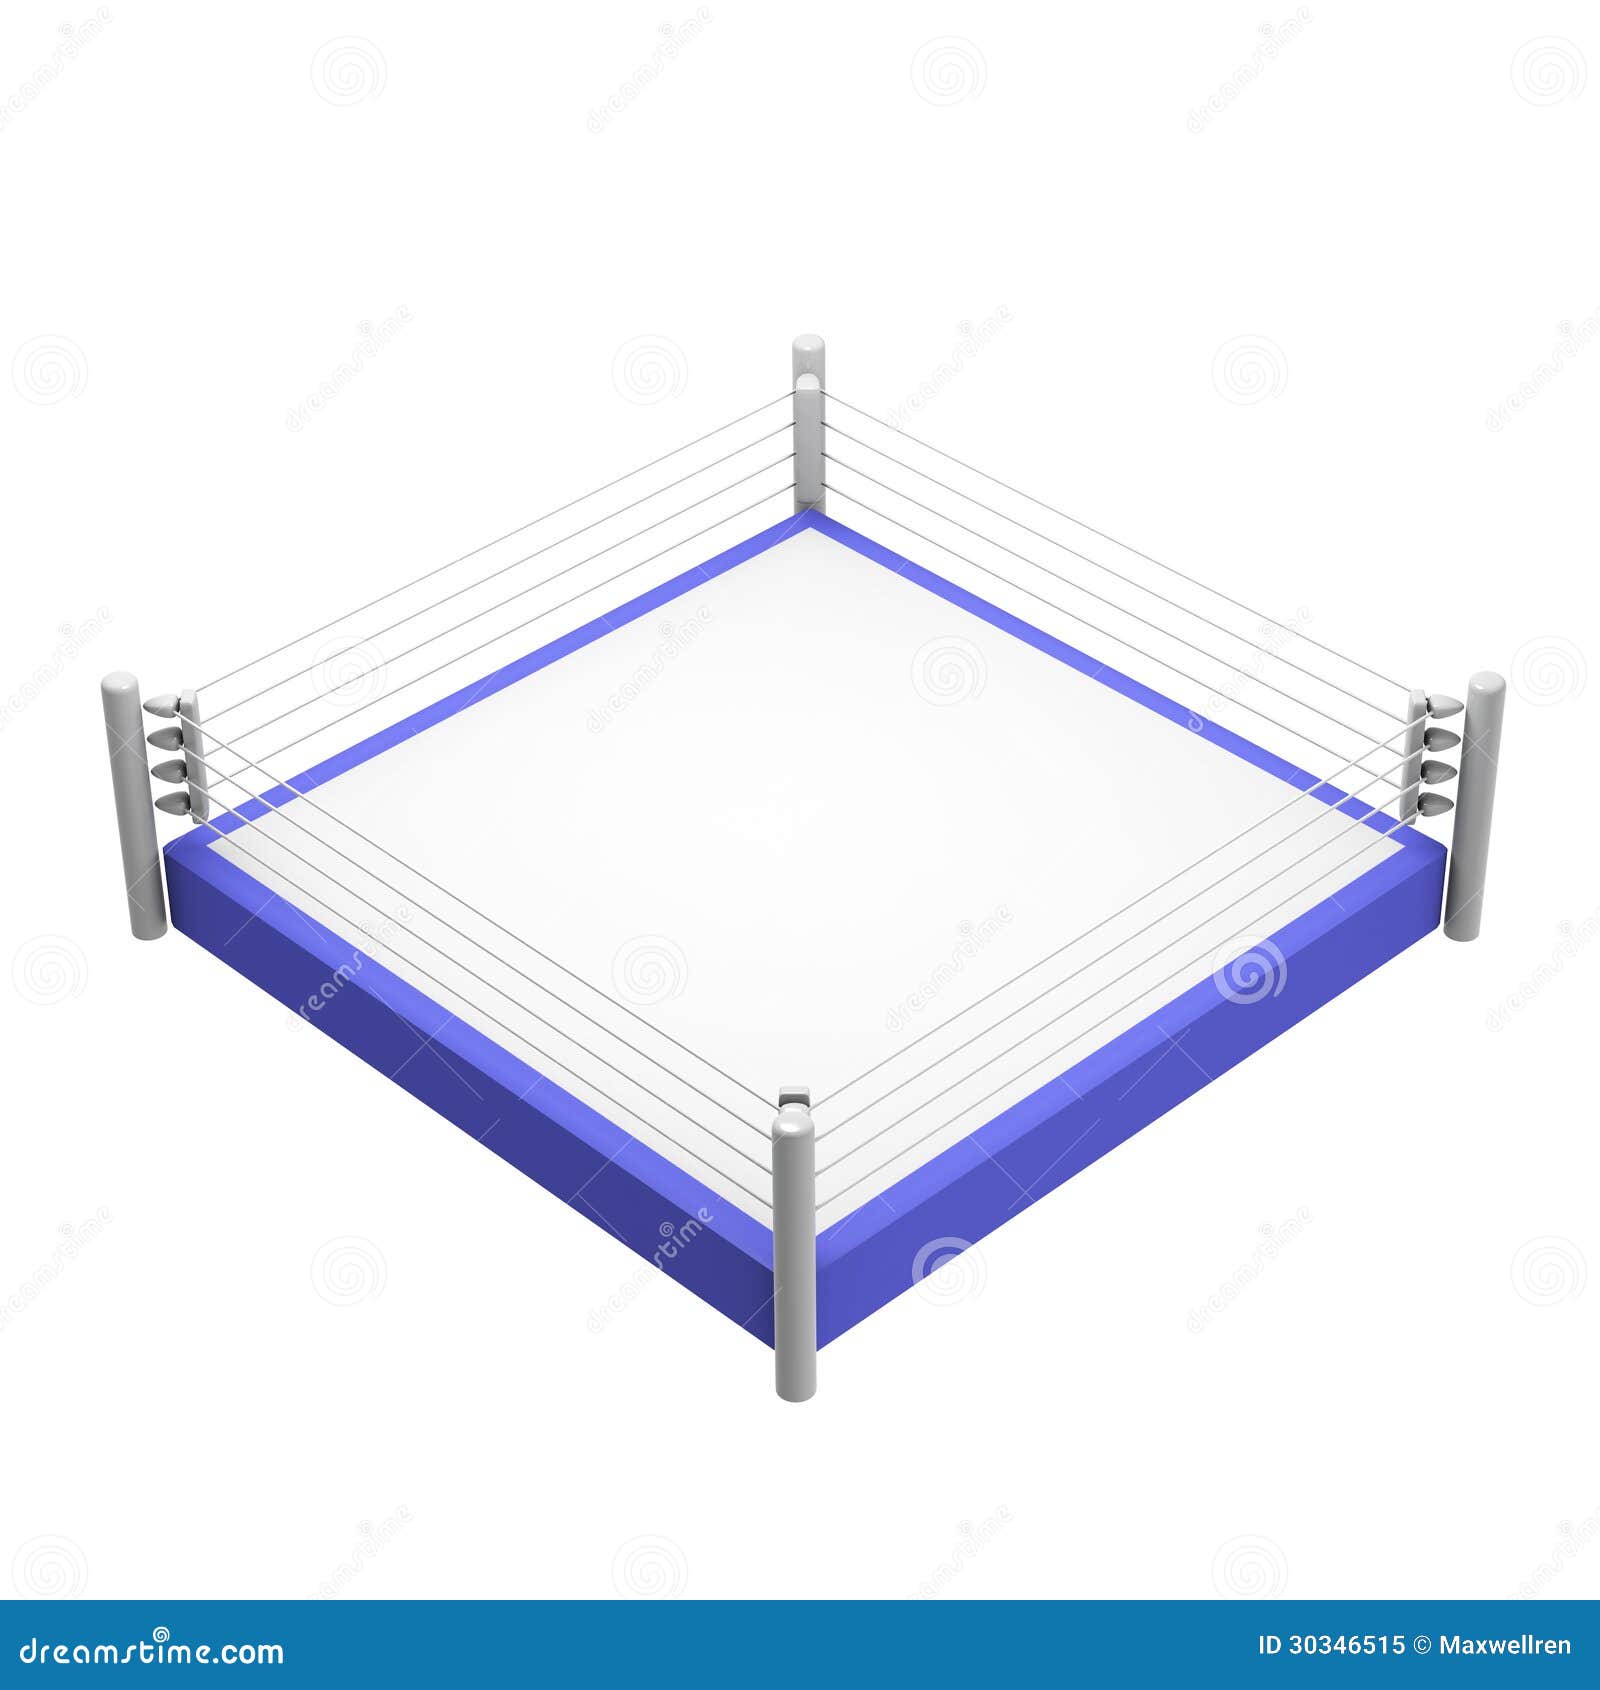 boxing ring clipart free - photo #31